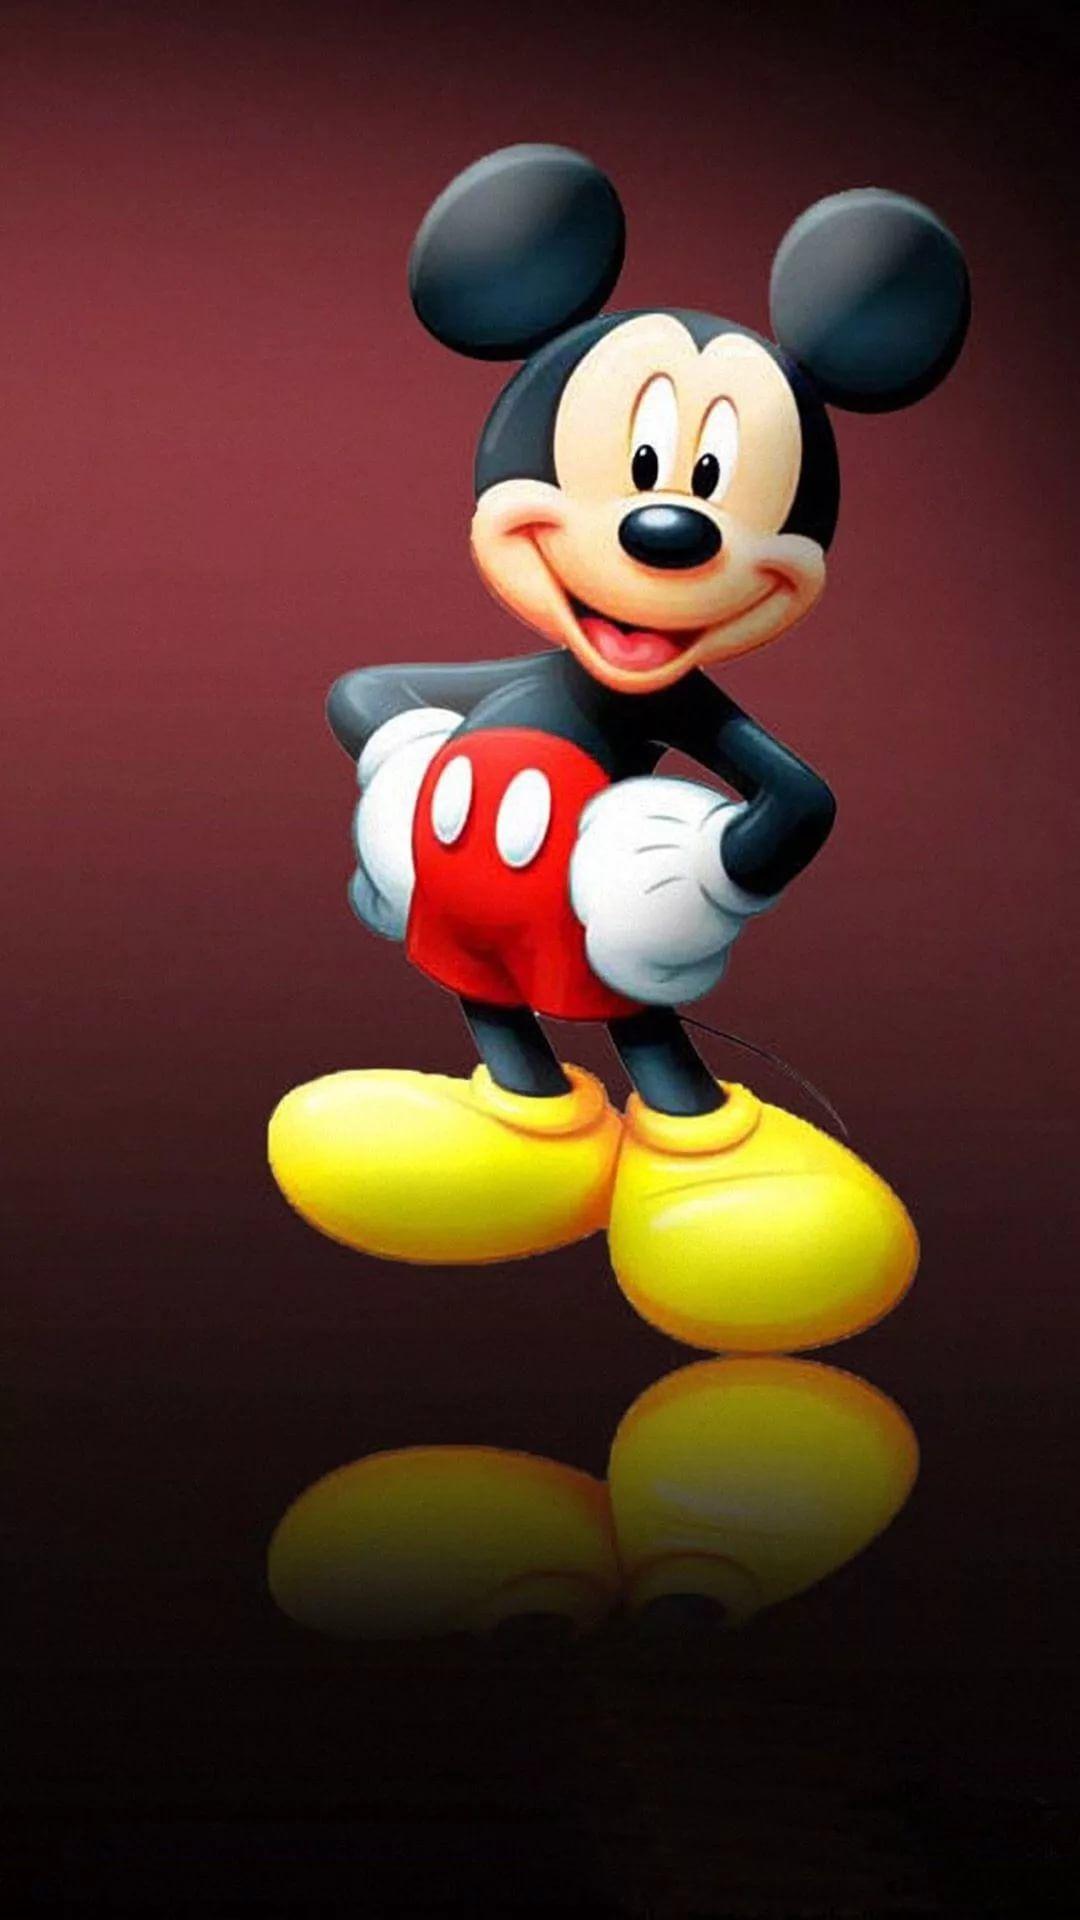 1080 x 1920 · jpeg - Mickey Mouse Iphone Wallpaper - KoLPaPer - Awesome Free HD Wallpapers